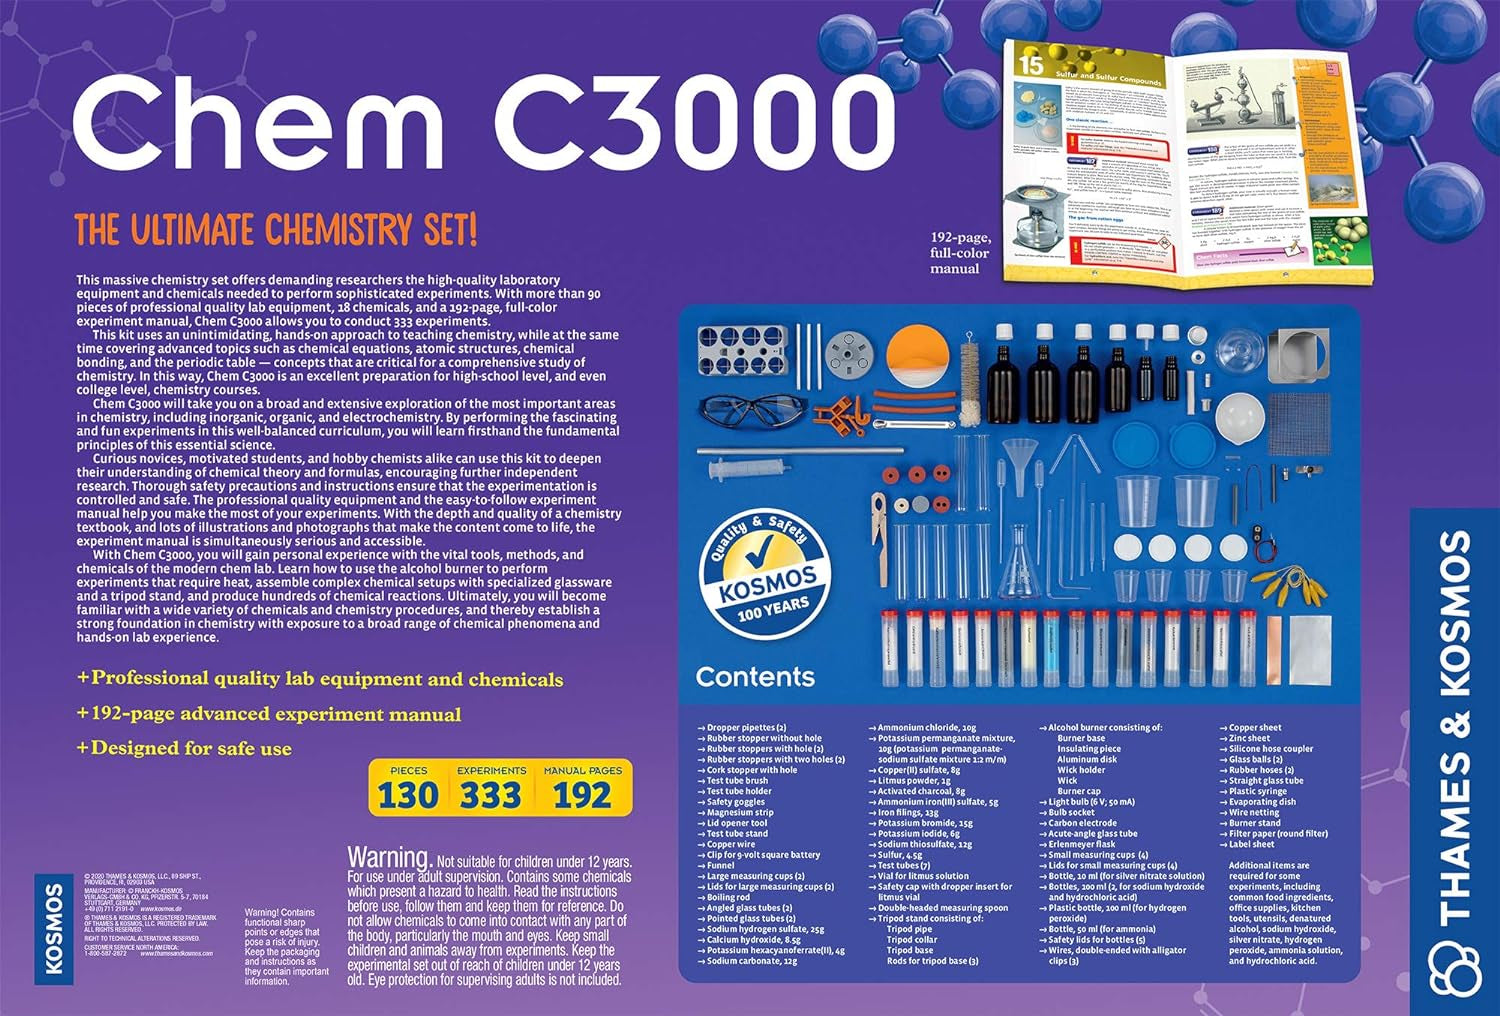 Thames & Kosmos Chem C3000 (V 2.0) Chemistry Set | Science Kit with 333 Experiments & 192 Page Lab Manual, Student Laboratory Quality Instruments & Chemicals, Multi, 21.3" Large X 7.2" W X 14.6" H (640132)